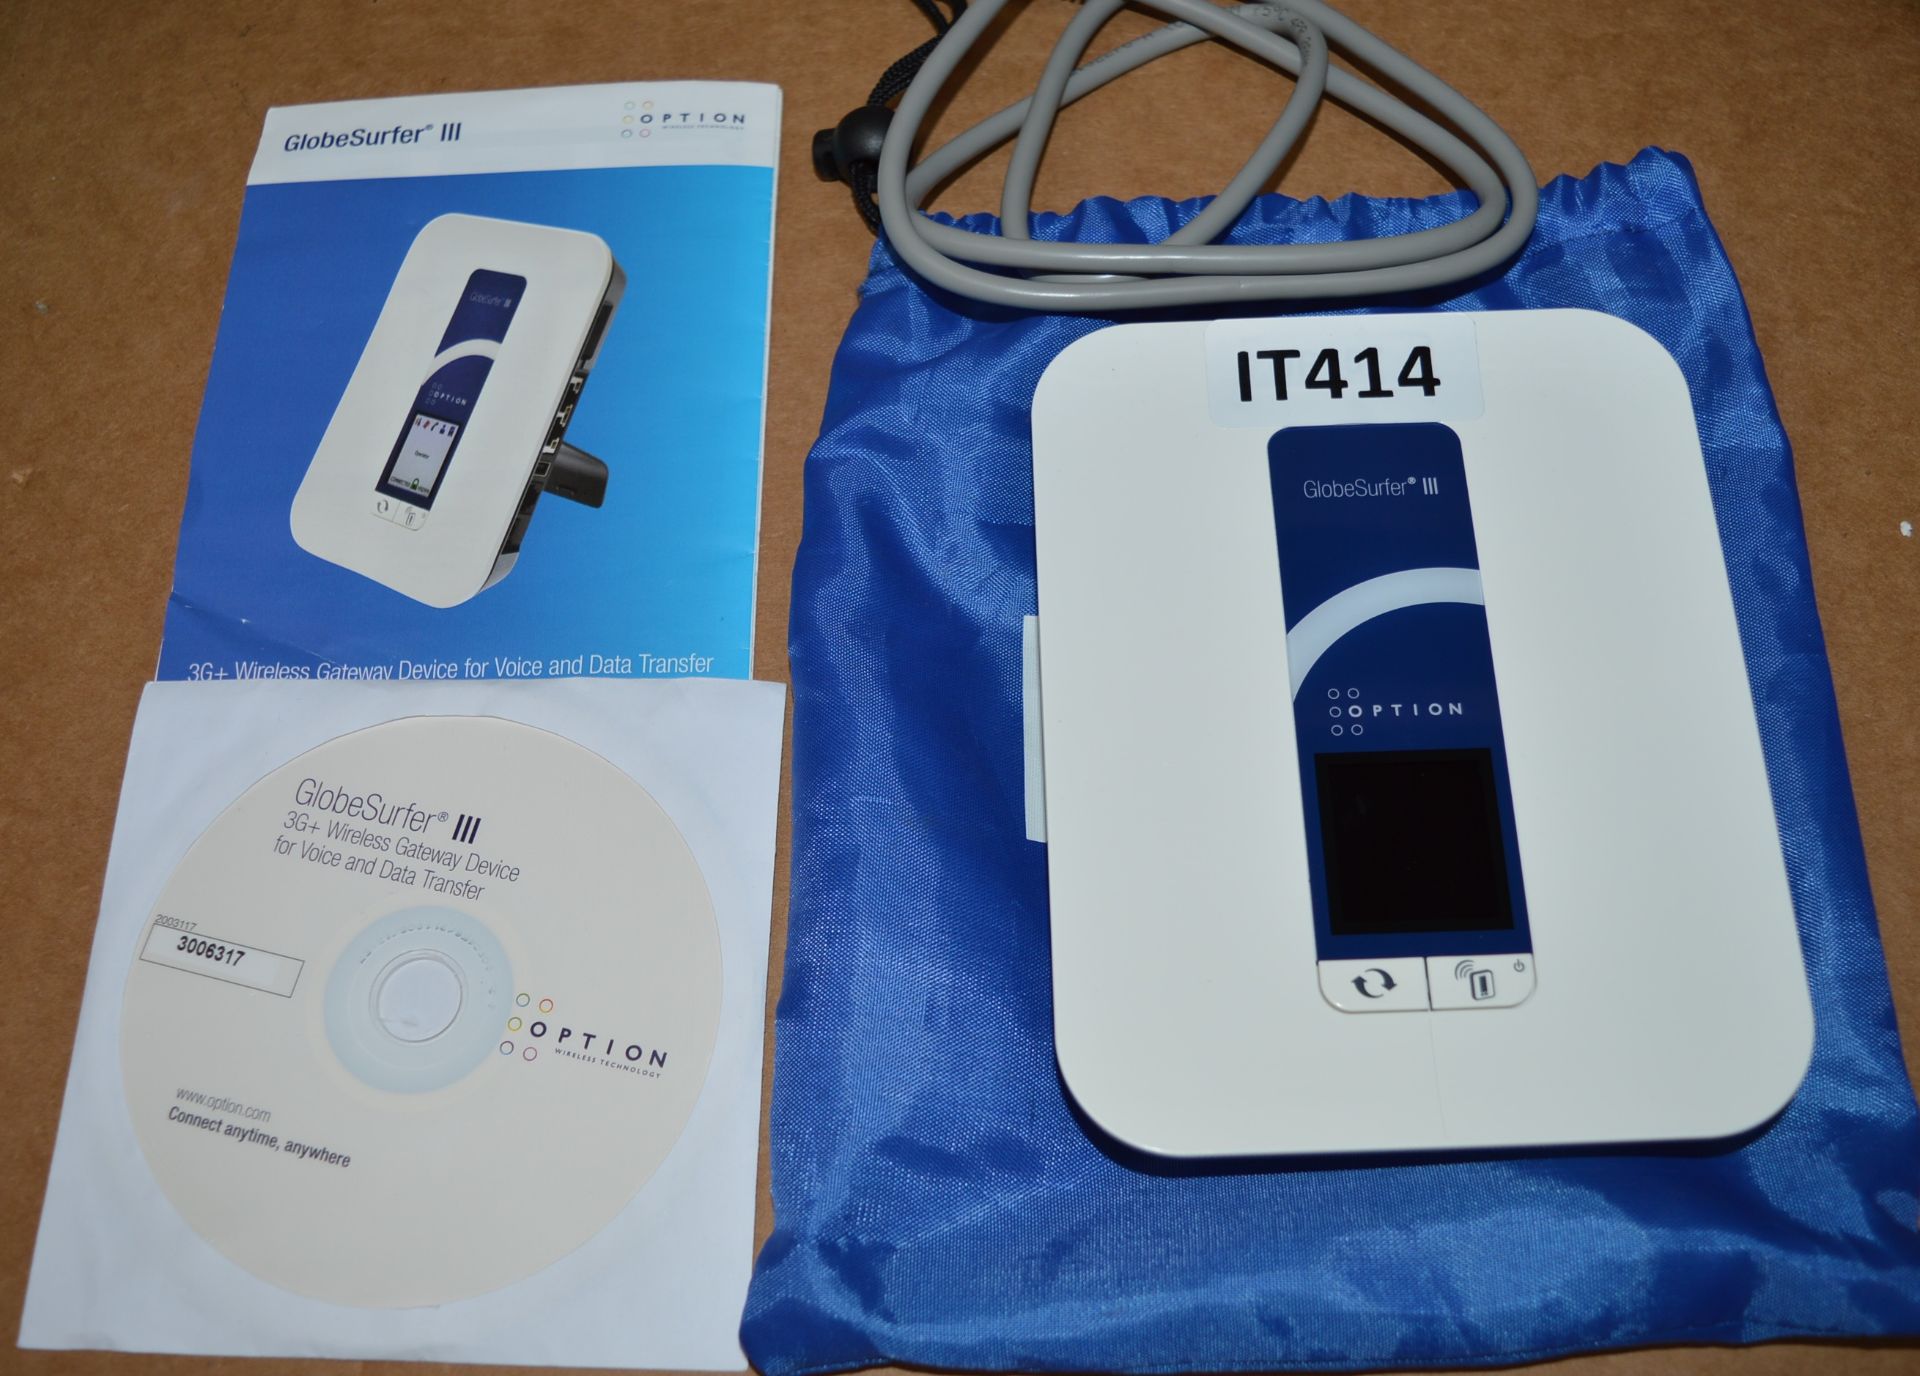 1 x Globesurfer III Data and Voice Wireless Gateway 3G WiFi Router - CL011 Ref IT414 - Location: - Image 2 of 3